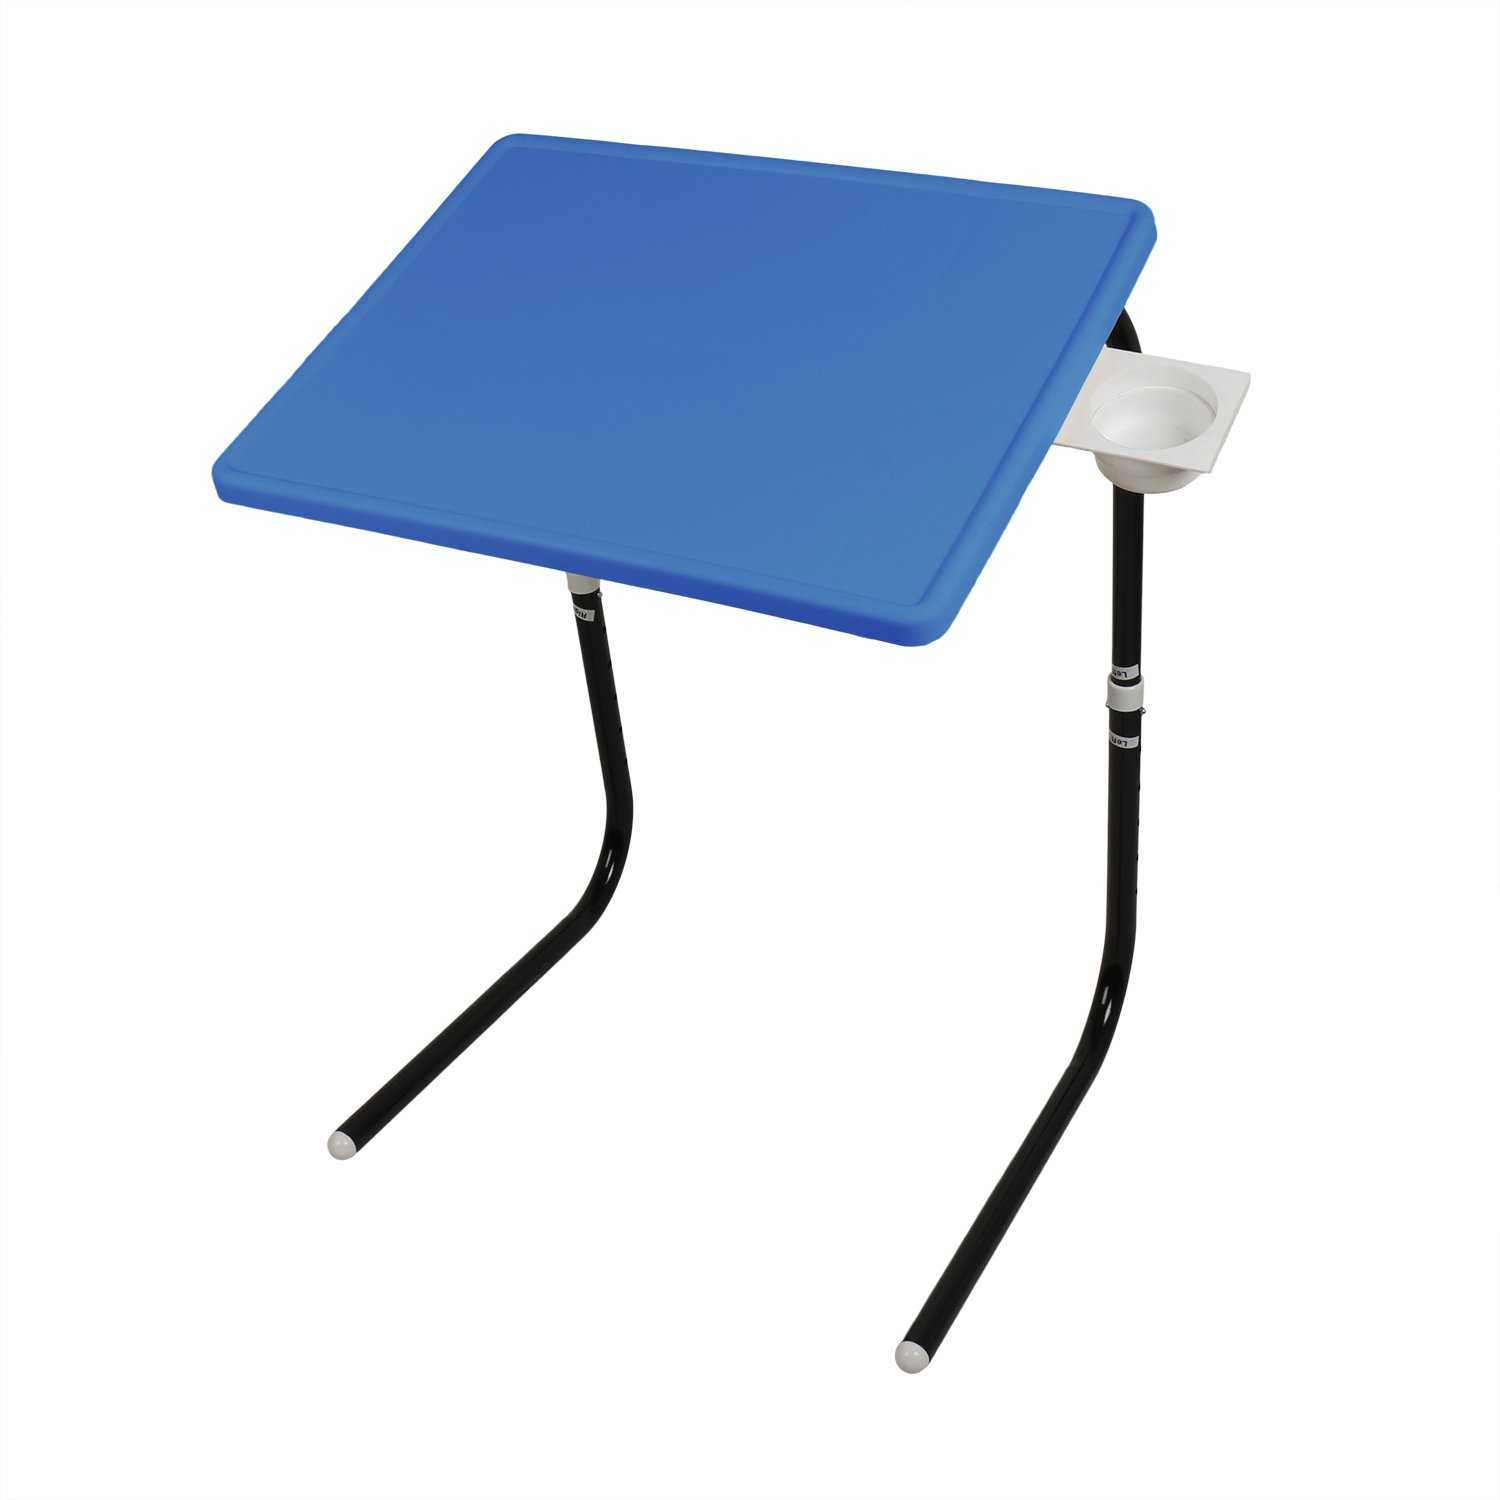  Tablemate with blue finishing | Wudore